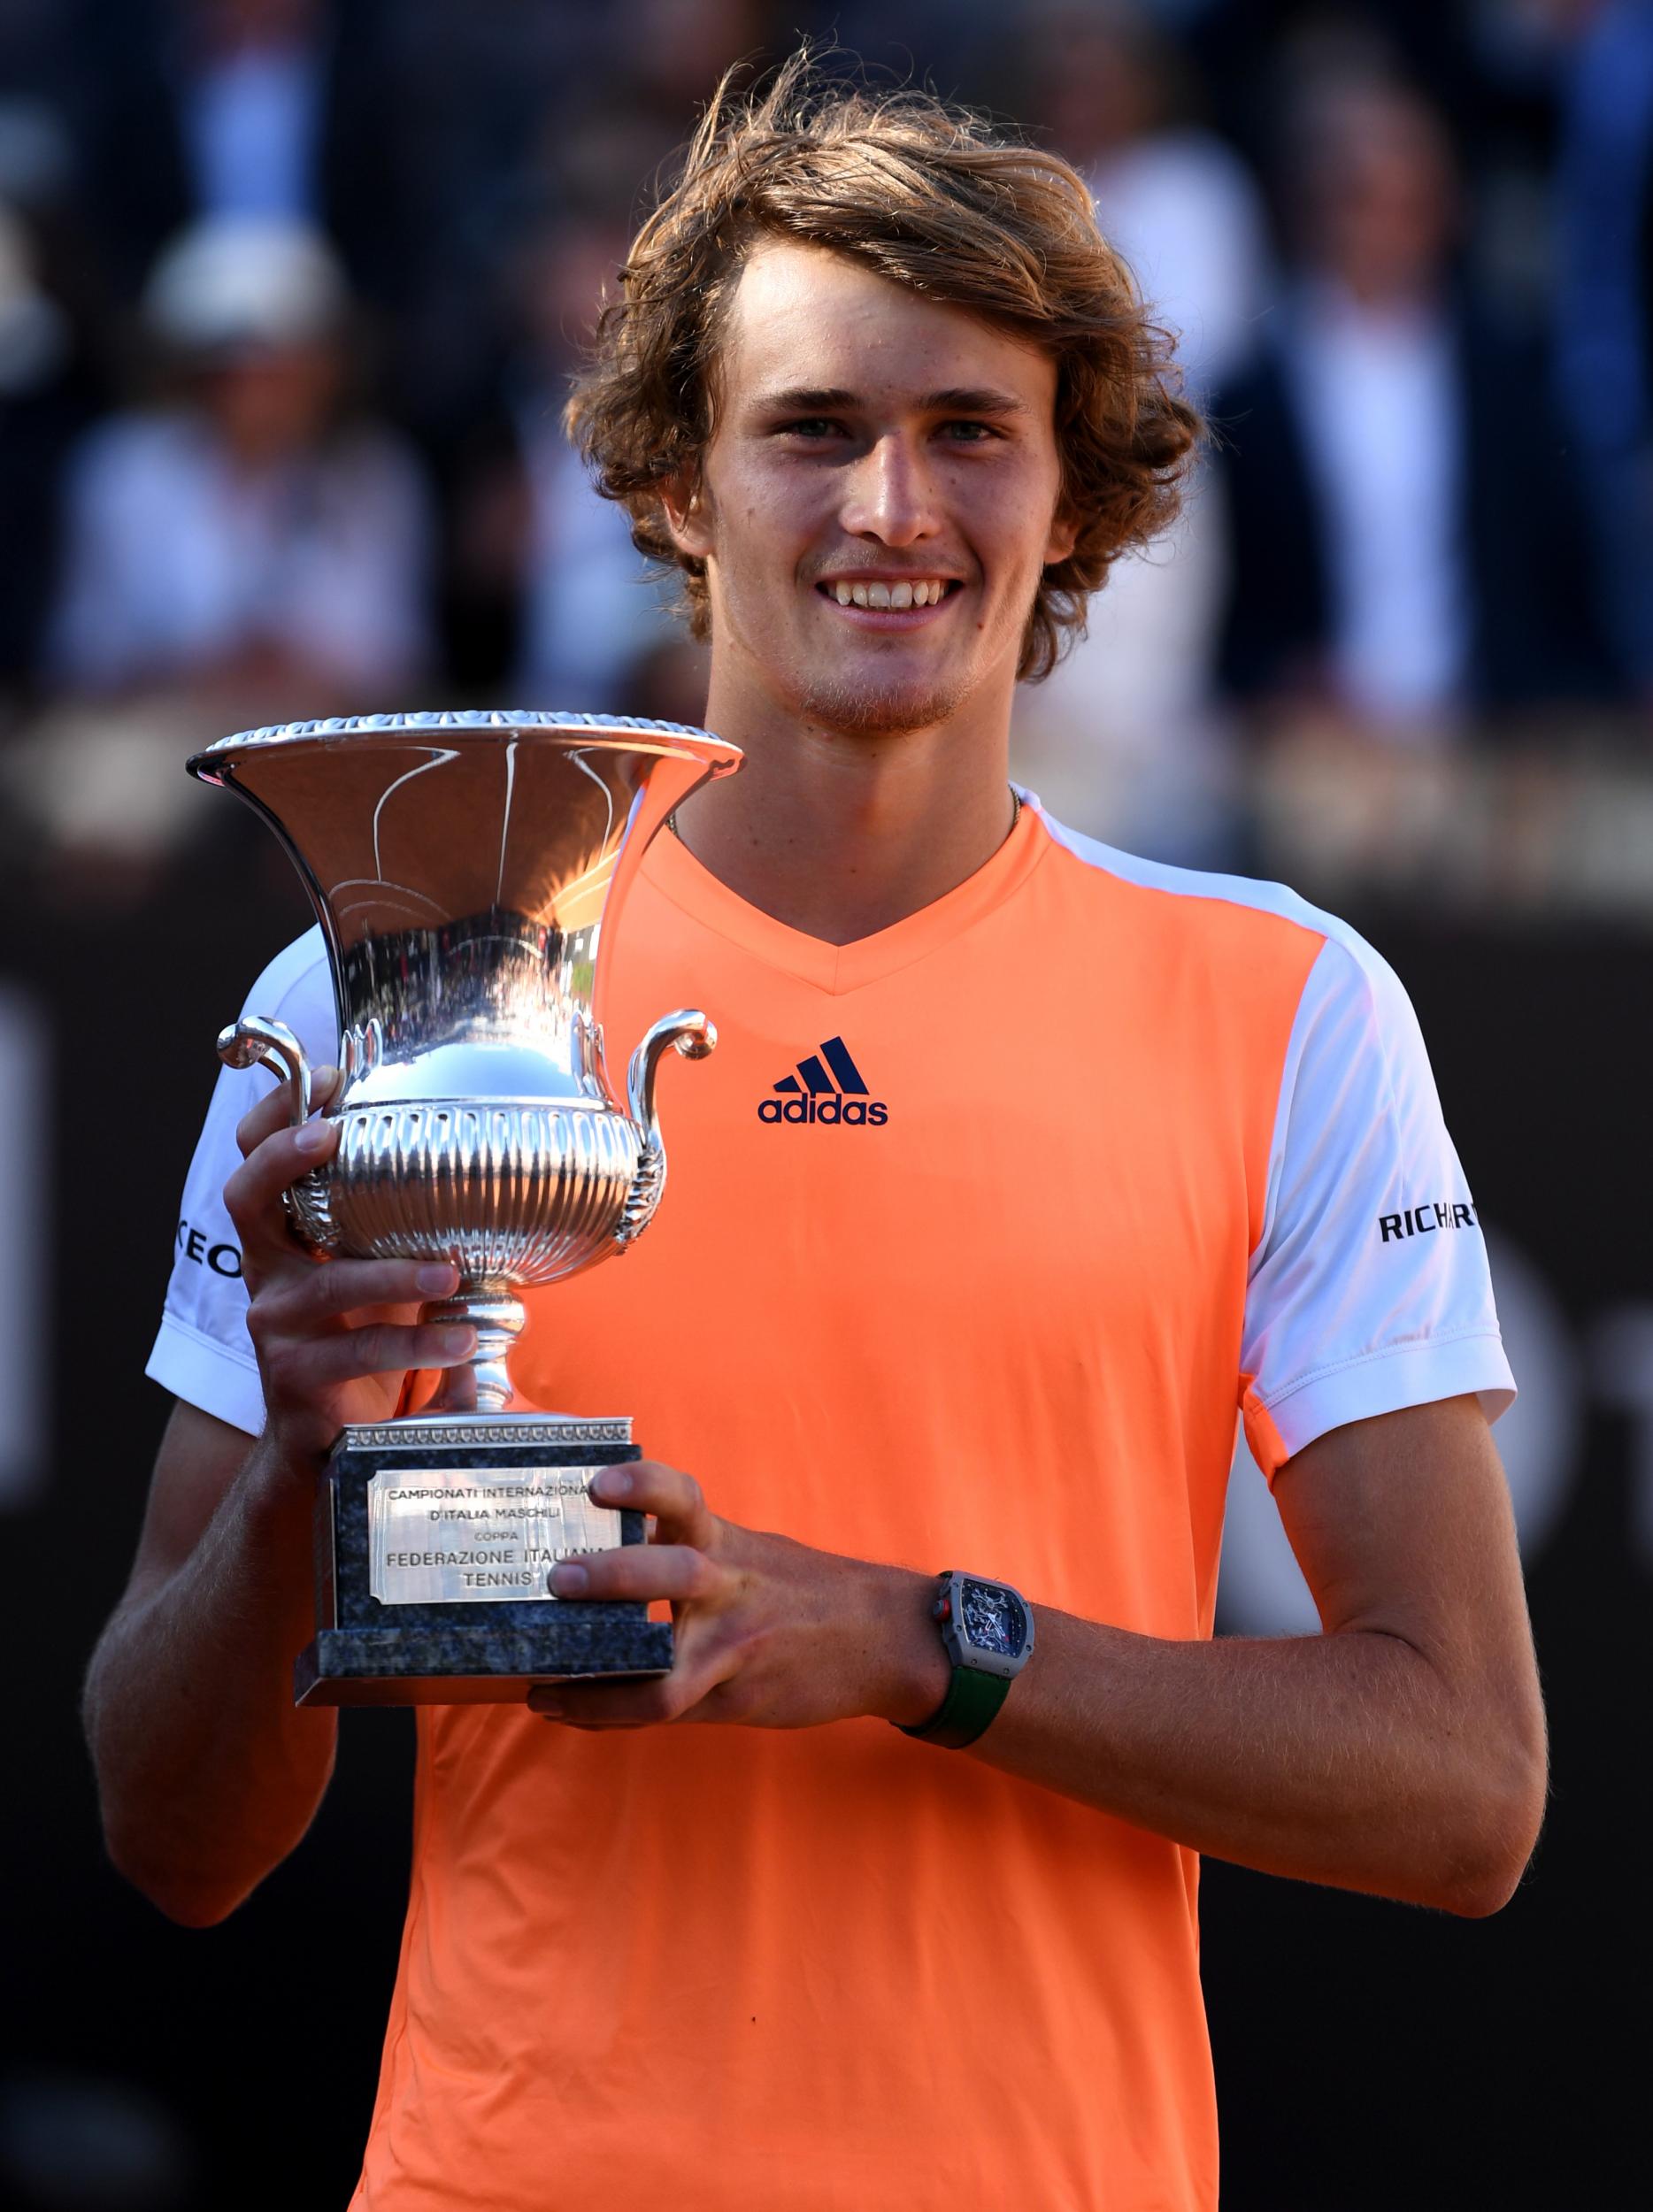 Zverev is the youngest player to win a Masters title since Djokovic